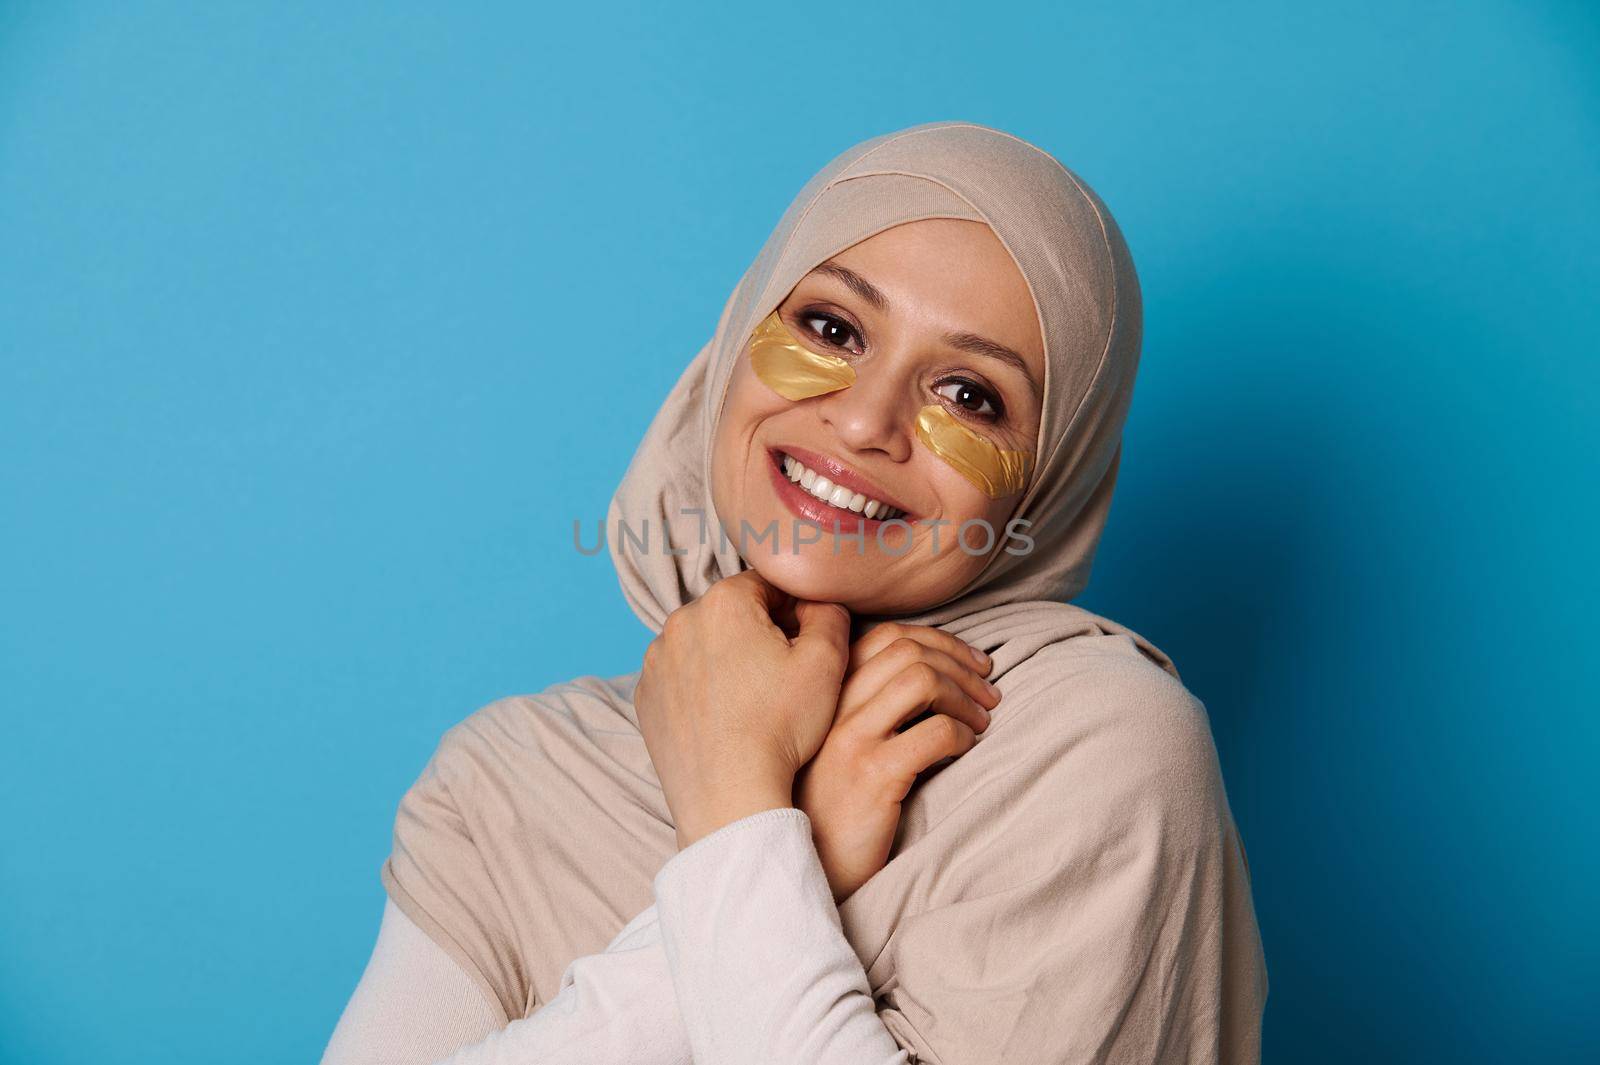 Beautiful woman with covered head in hijab, smiling at camera with hydrogel collagen patches under eyes. Isolated on blue background with copy space